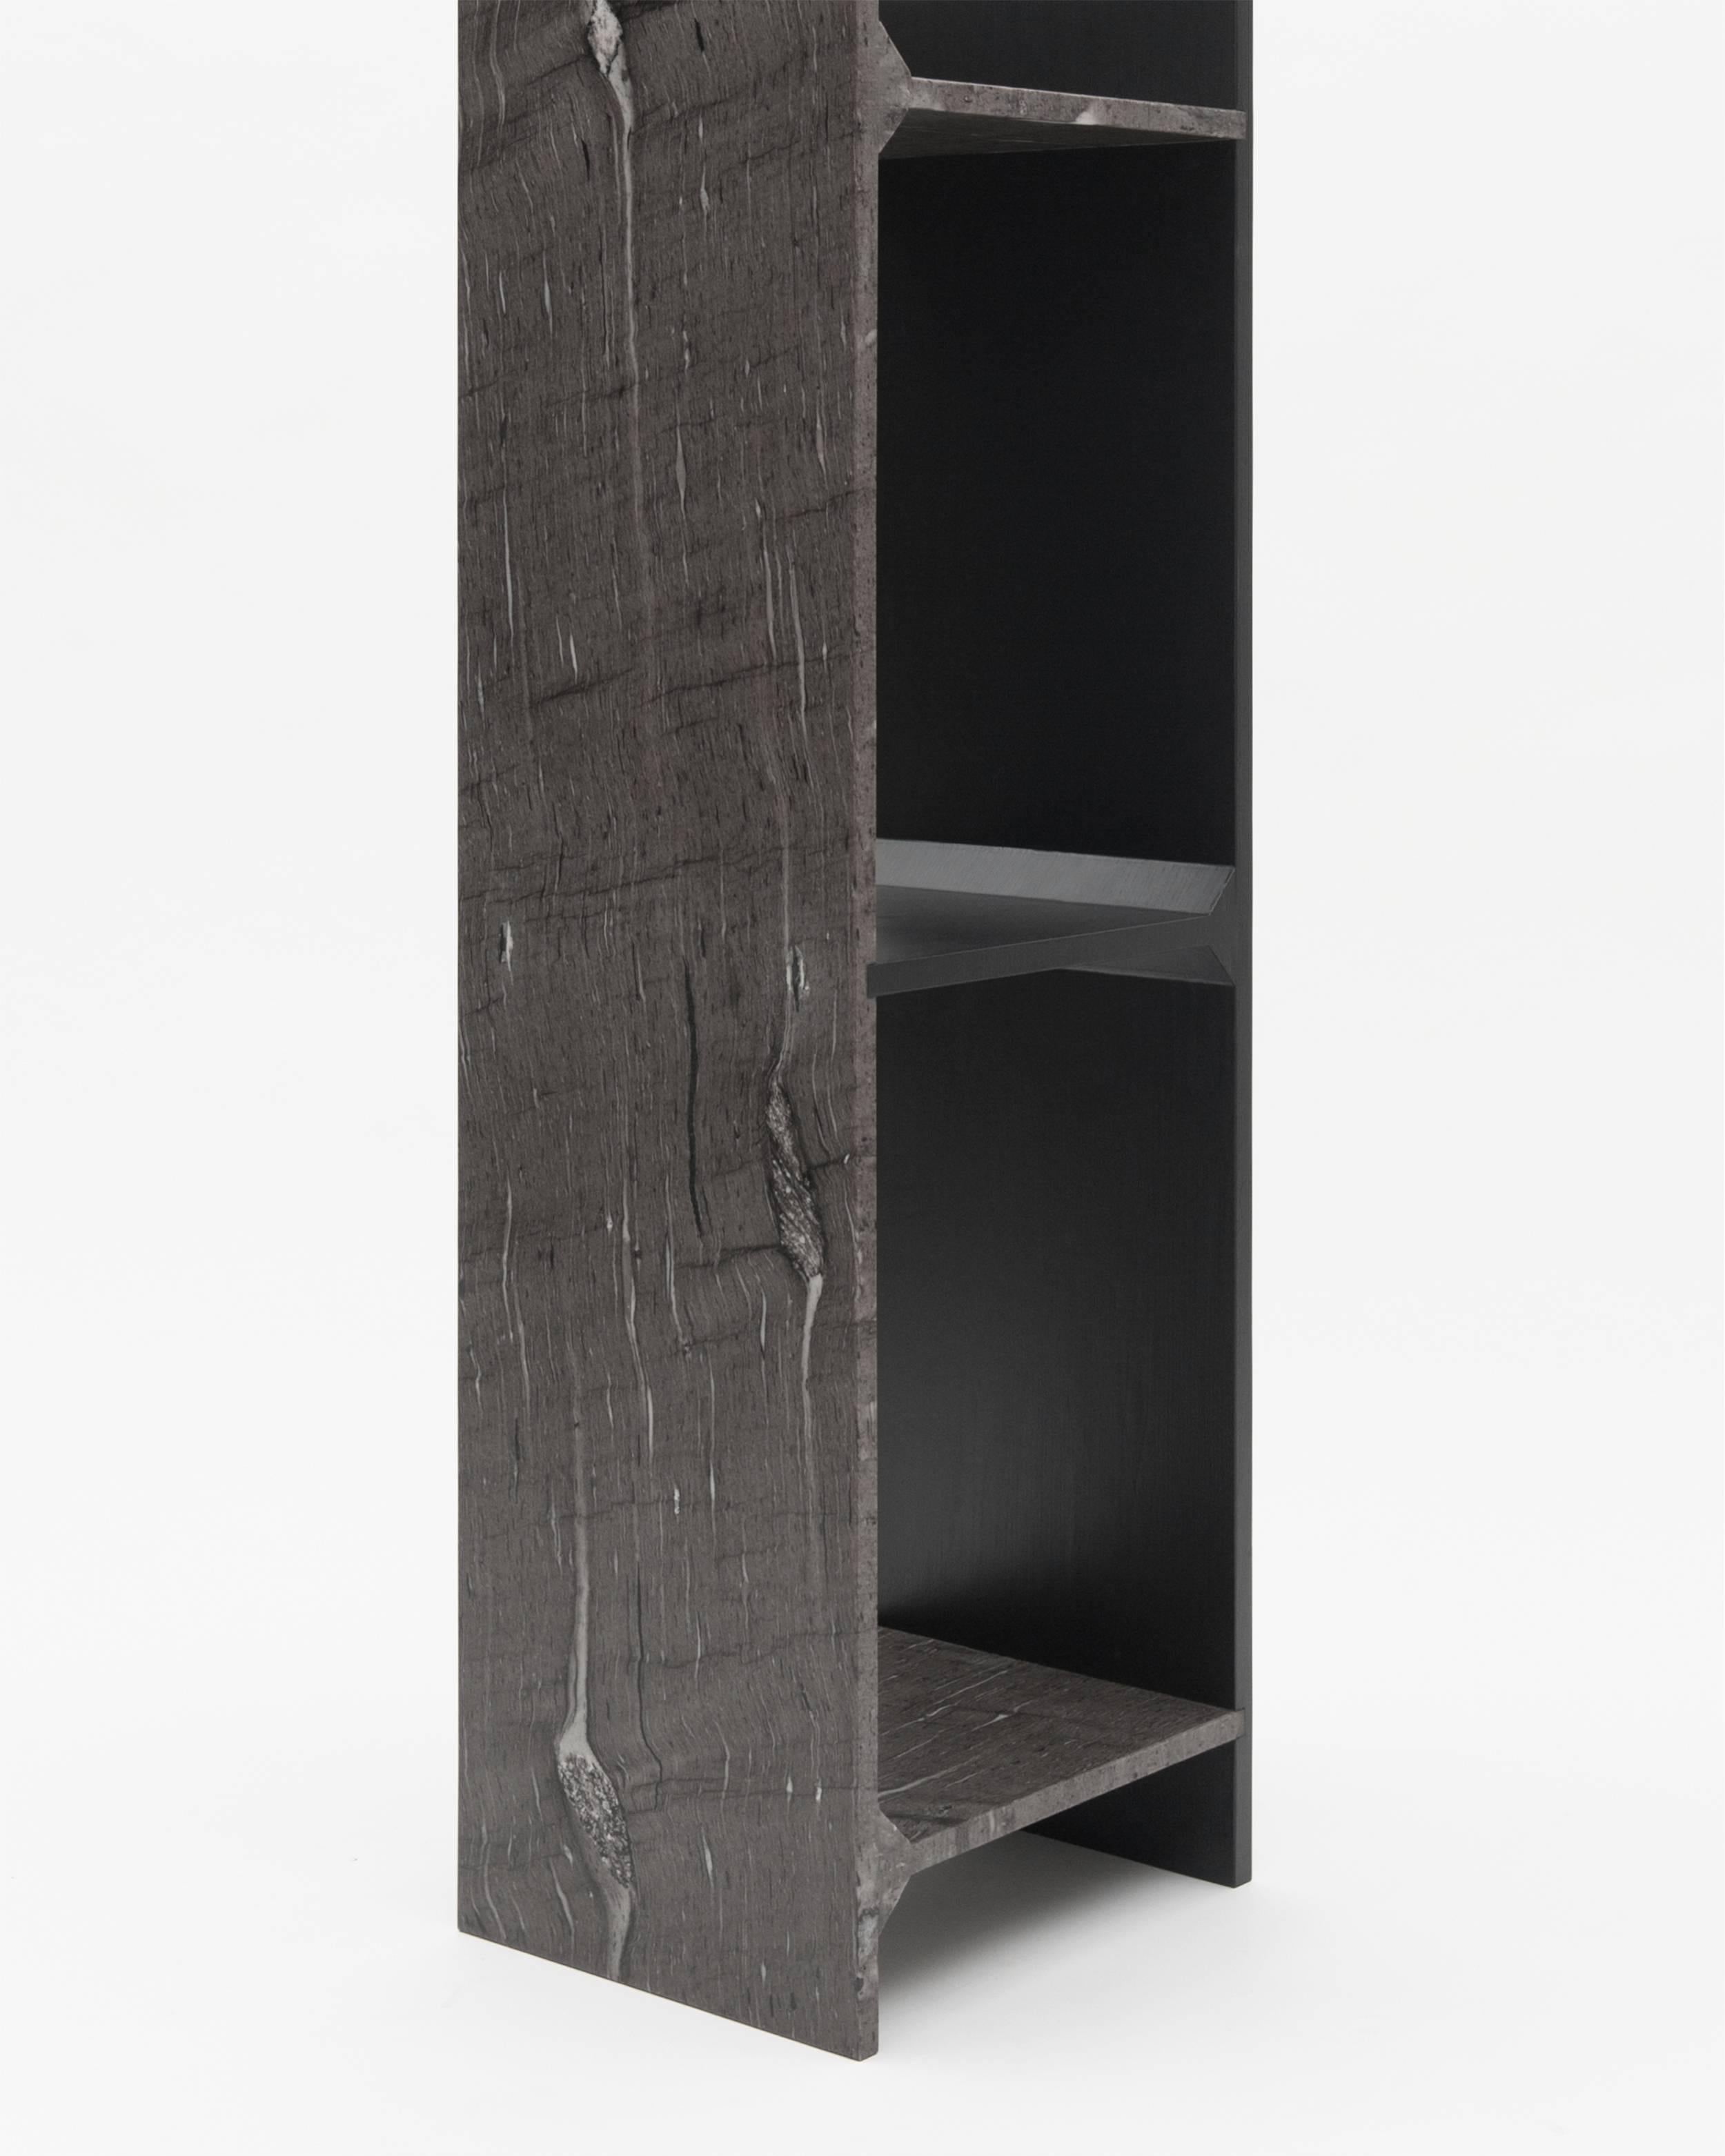 A-symmetry, a brown marble shelf by Frederic Saulou
Frederic Saulou.
Materials: Marble granite, massif oak stained.
Dimensions: 130 x 40 x 34 cm.
Edition of 8.
Signed and numbered.

